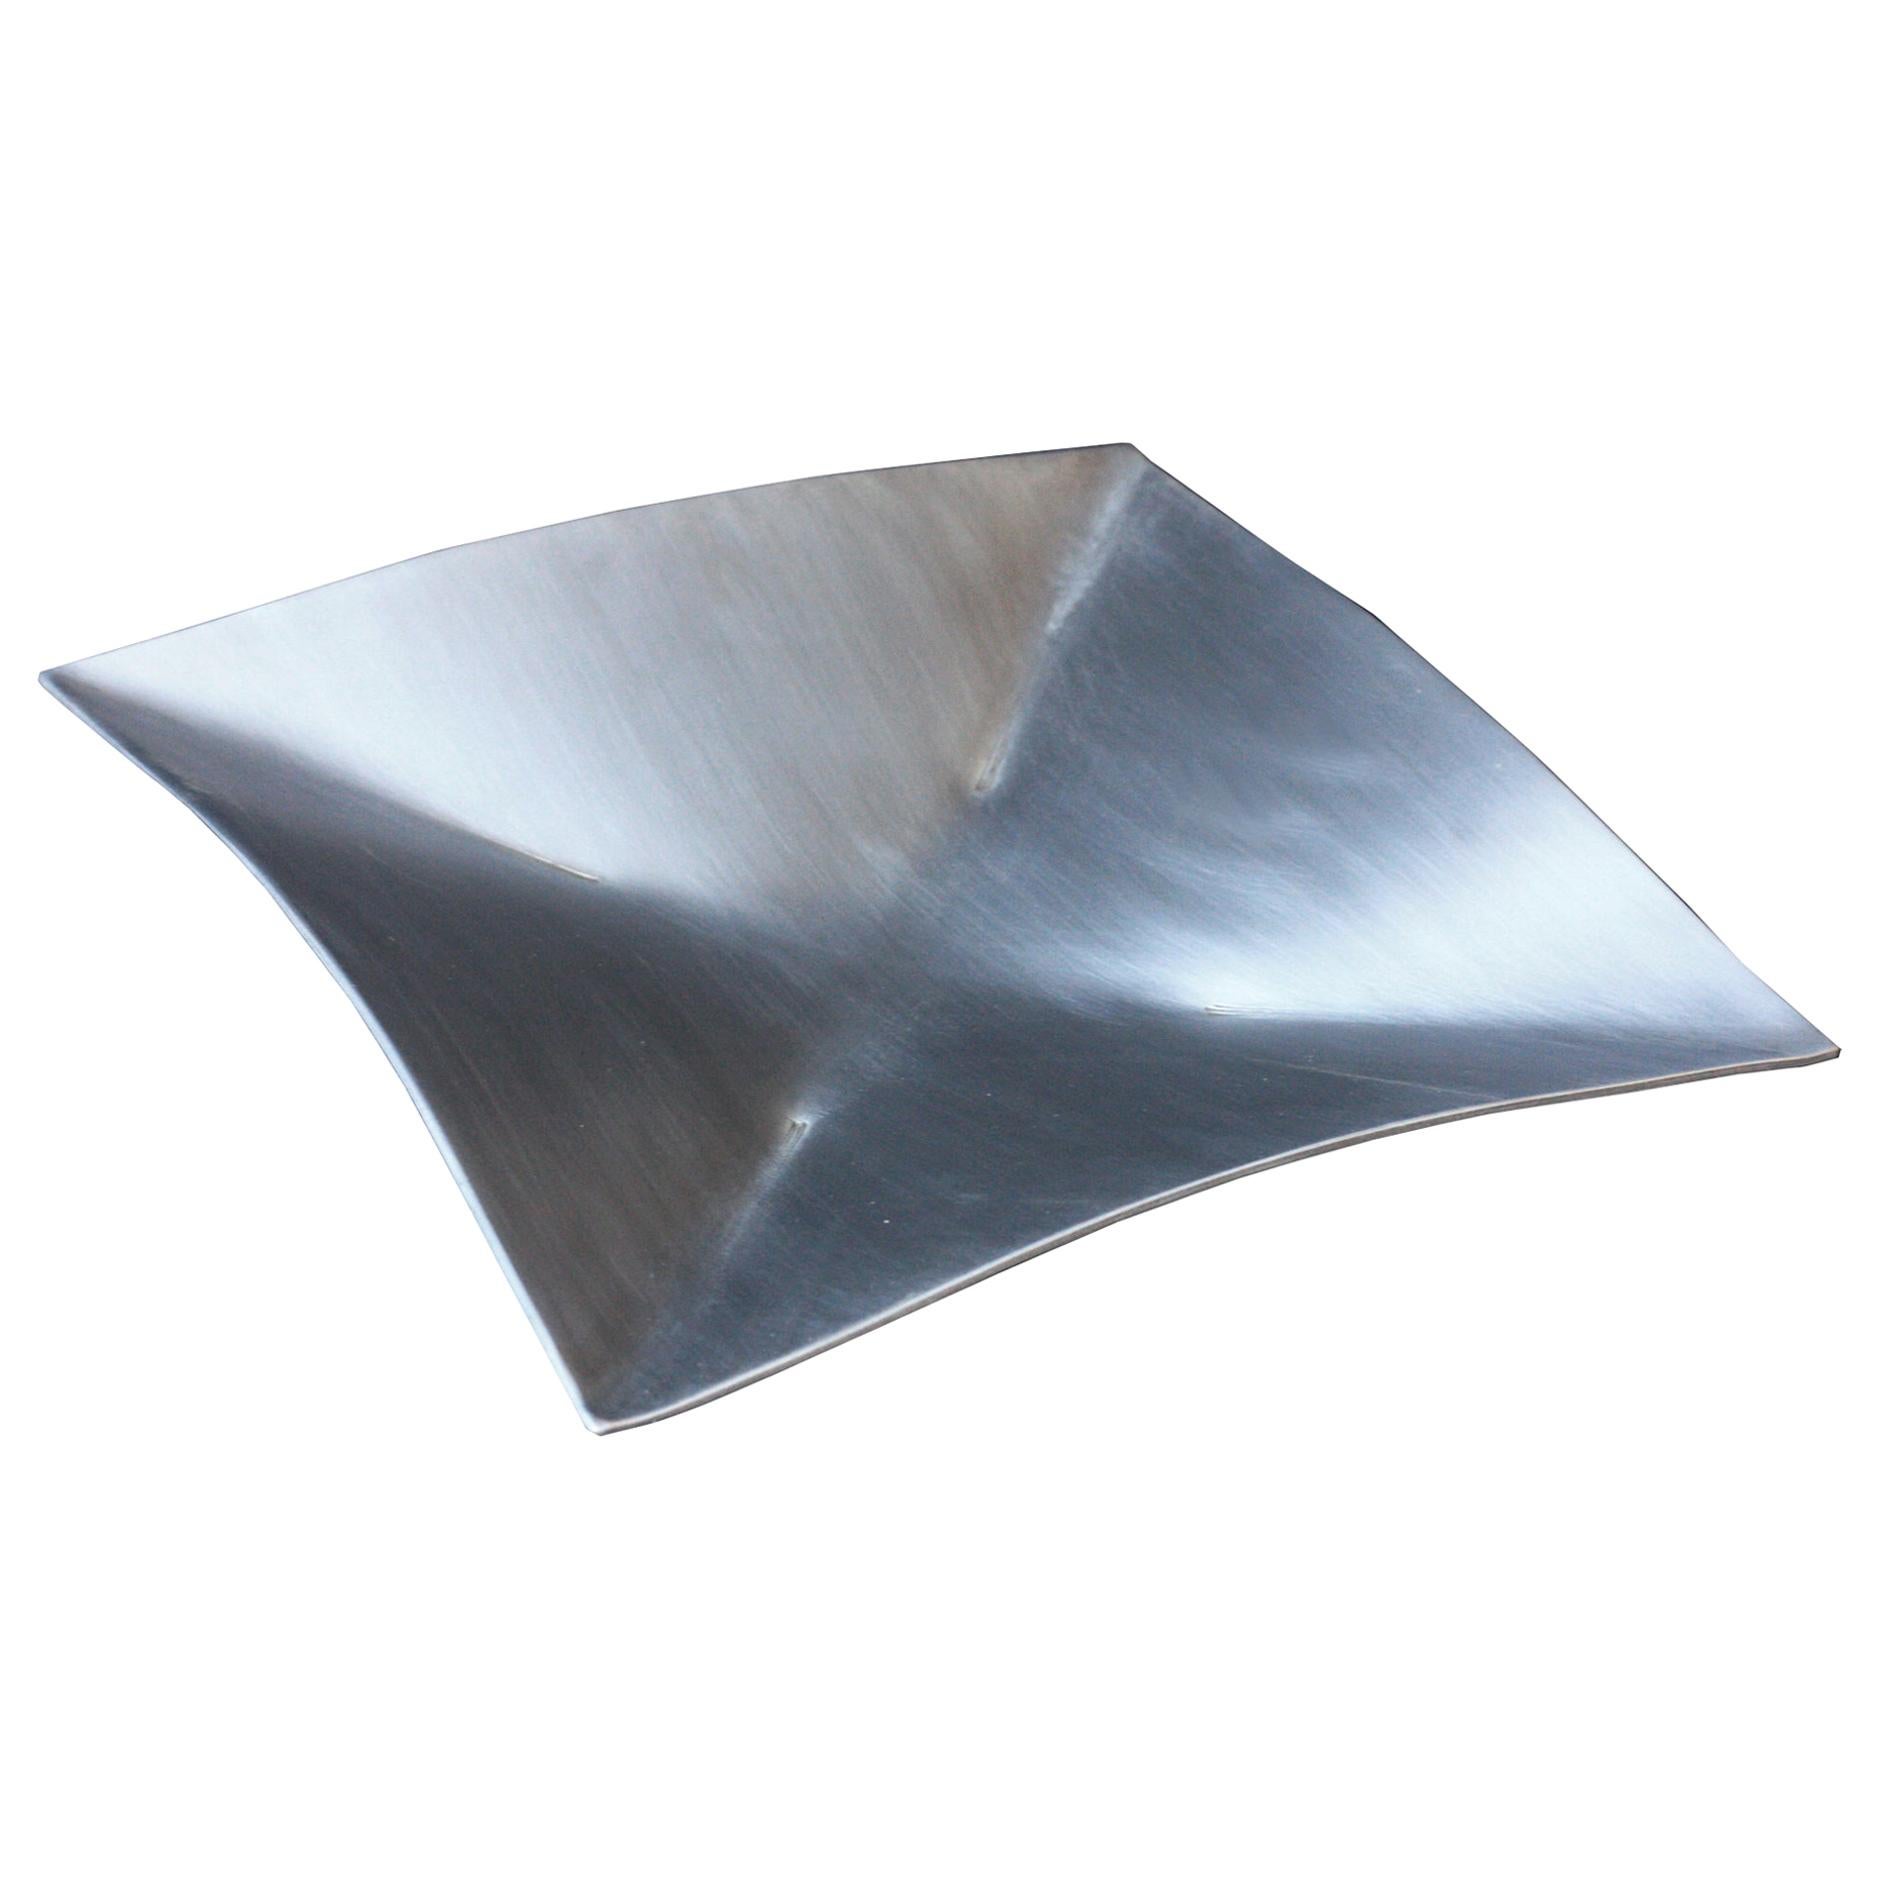 Metal Tray in Raw Waxed Aluminum, Origami Style, Contemporary Design by Mtharu For Sale